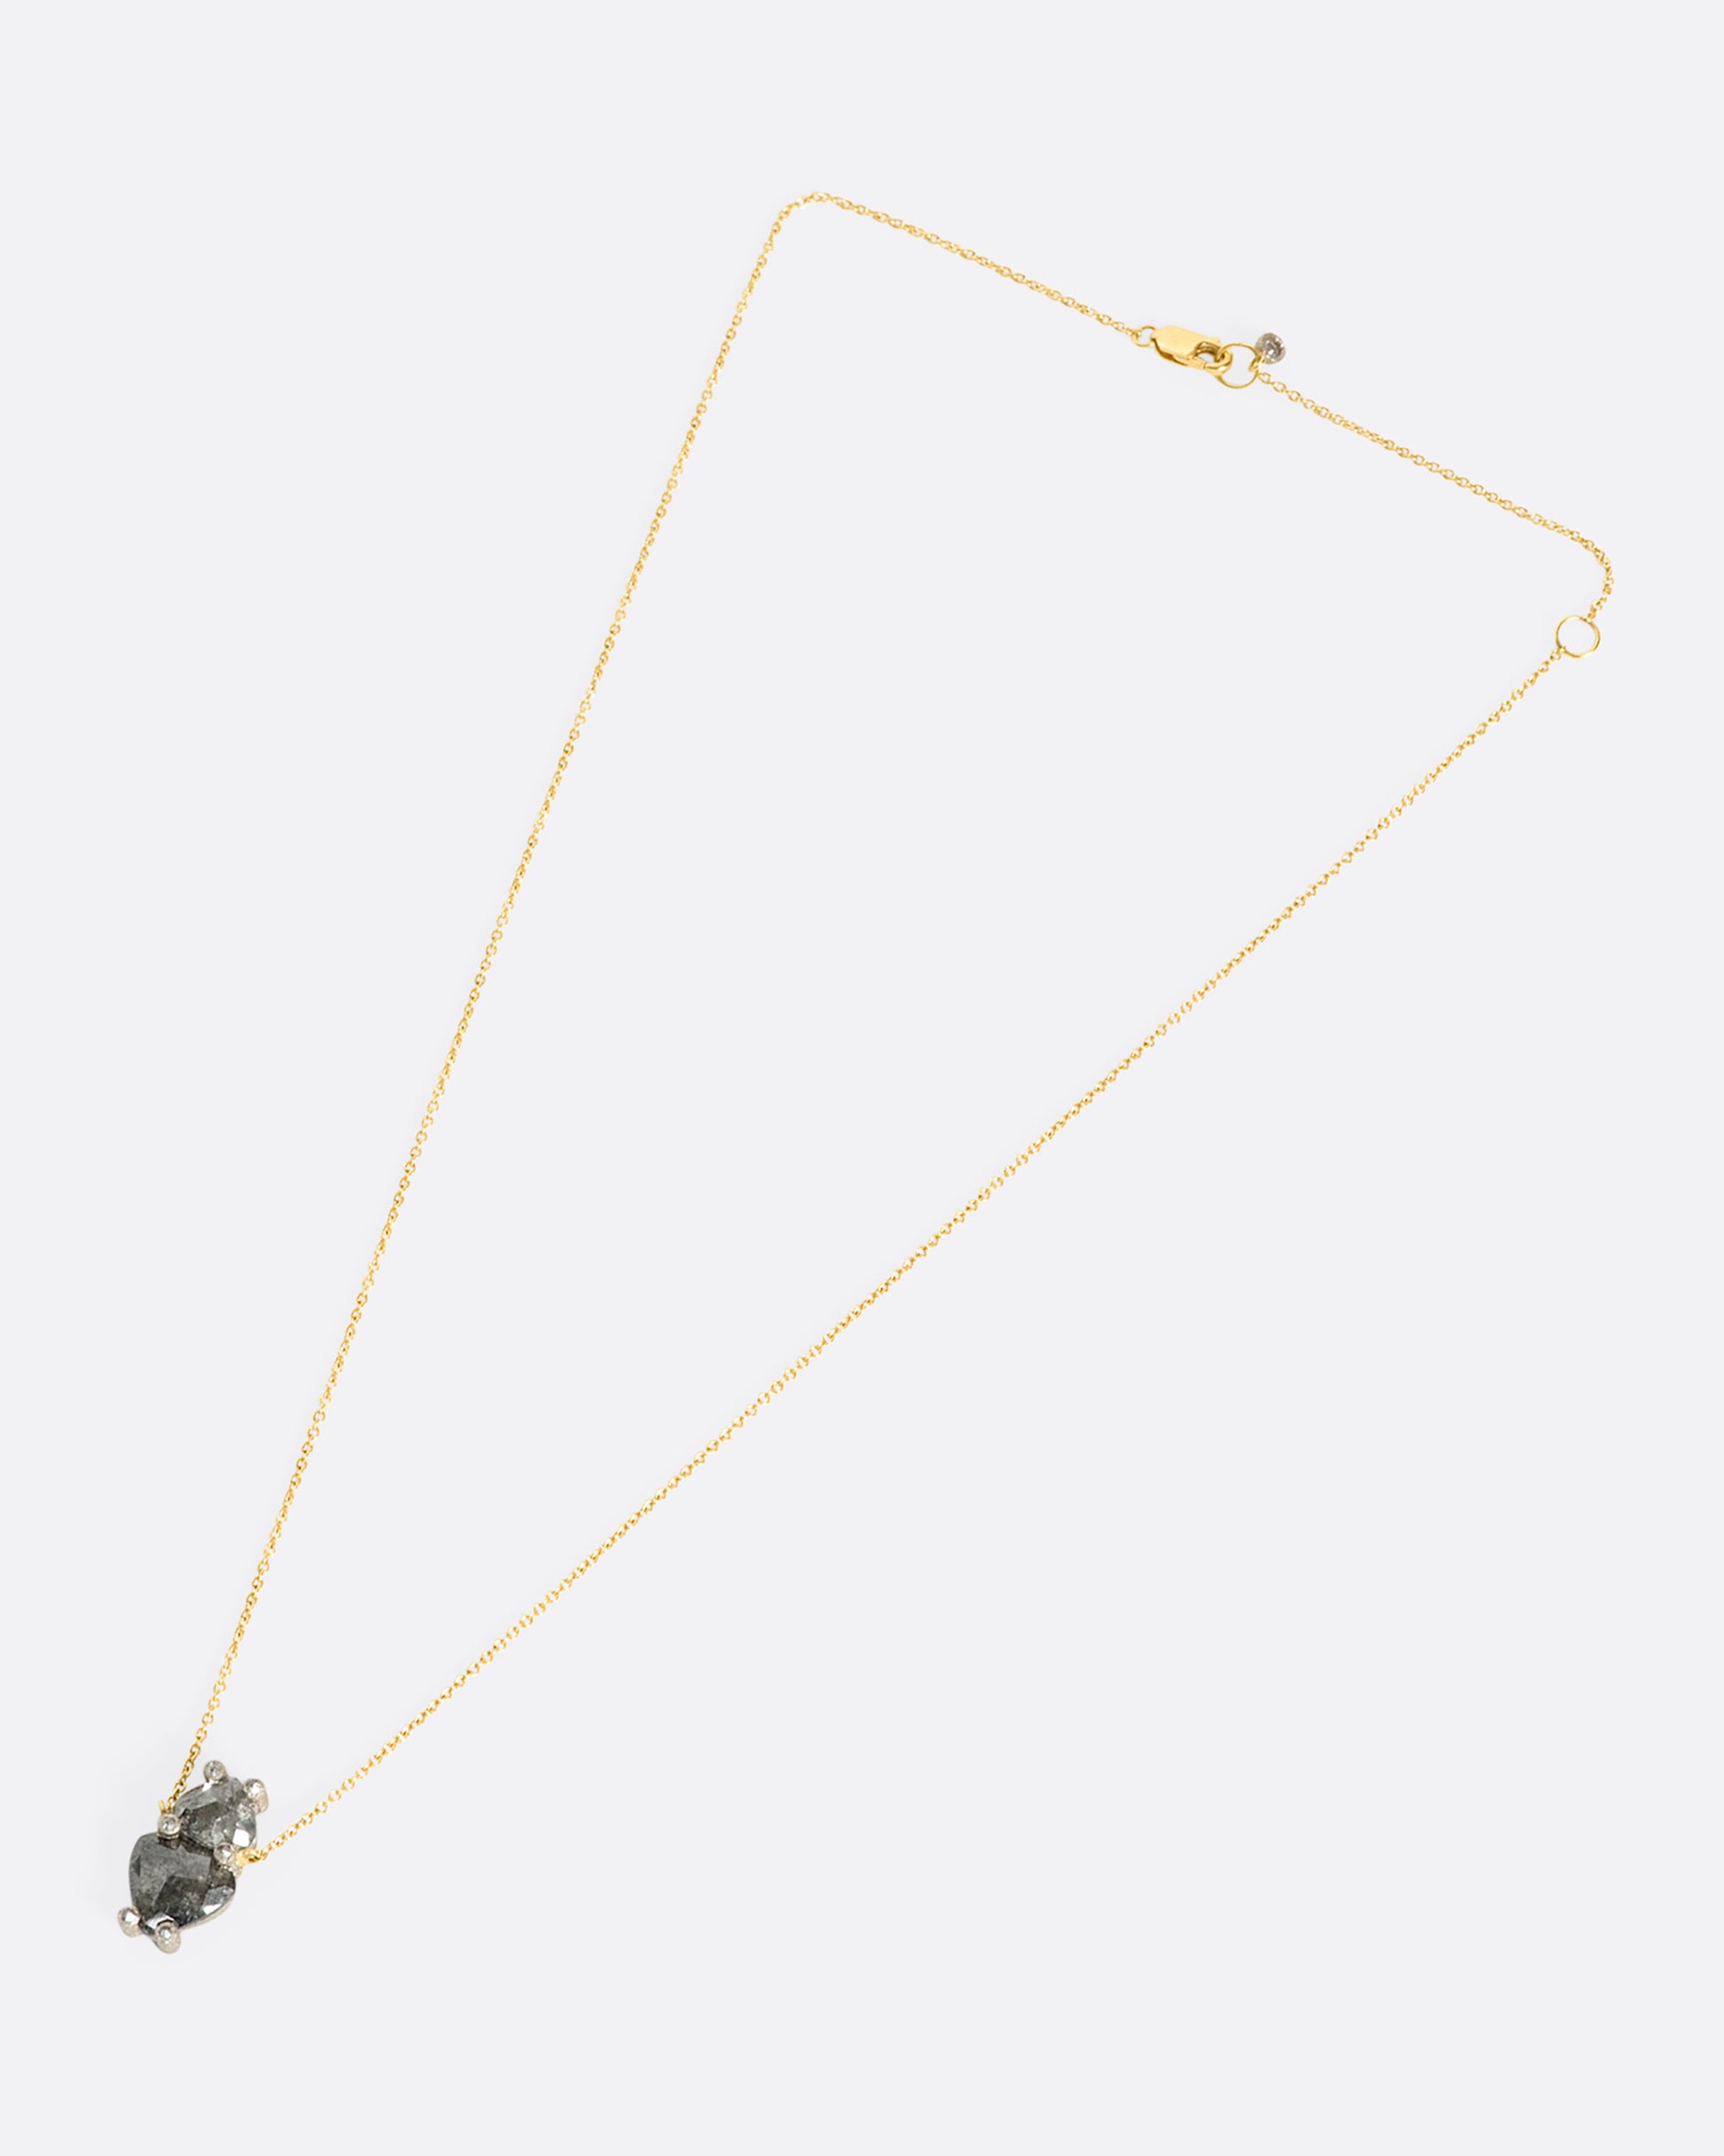 An overhead view of a pendant with two shield cut grey diamonds on a yellow gold chain laying down flat.